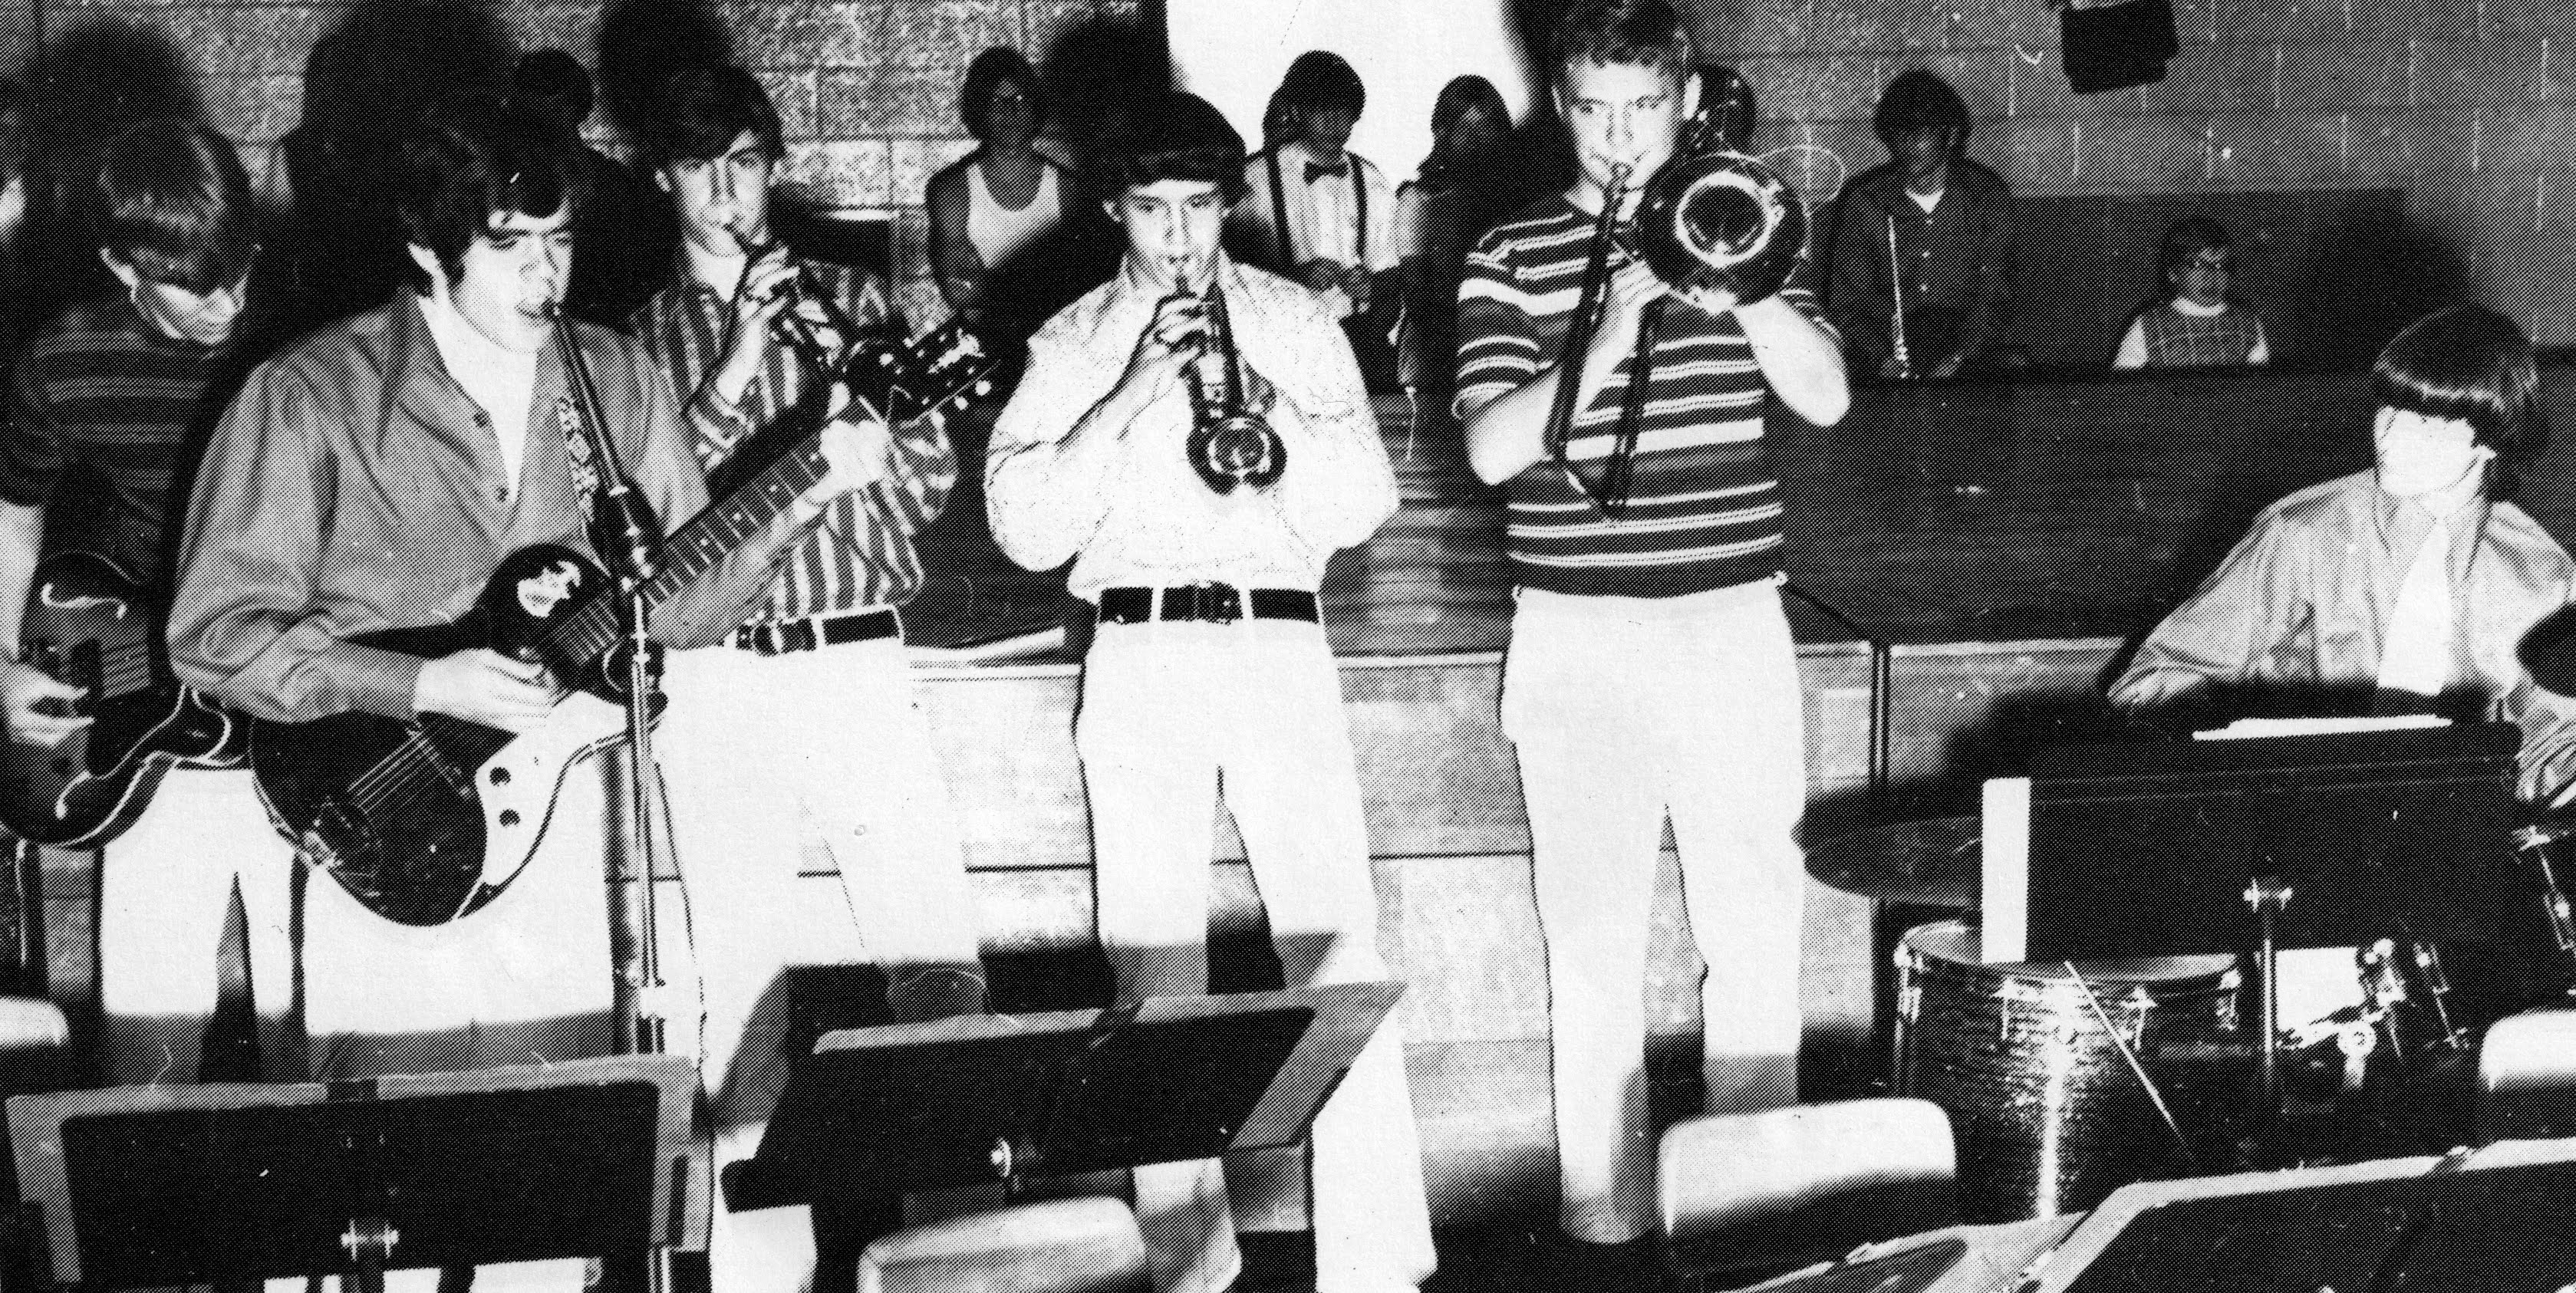 The band performs in the early '70s